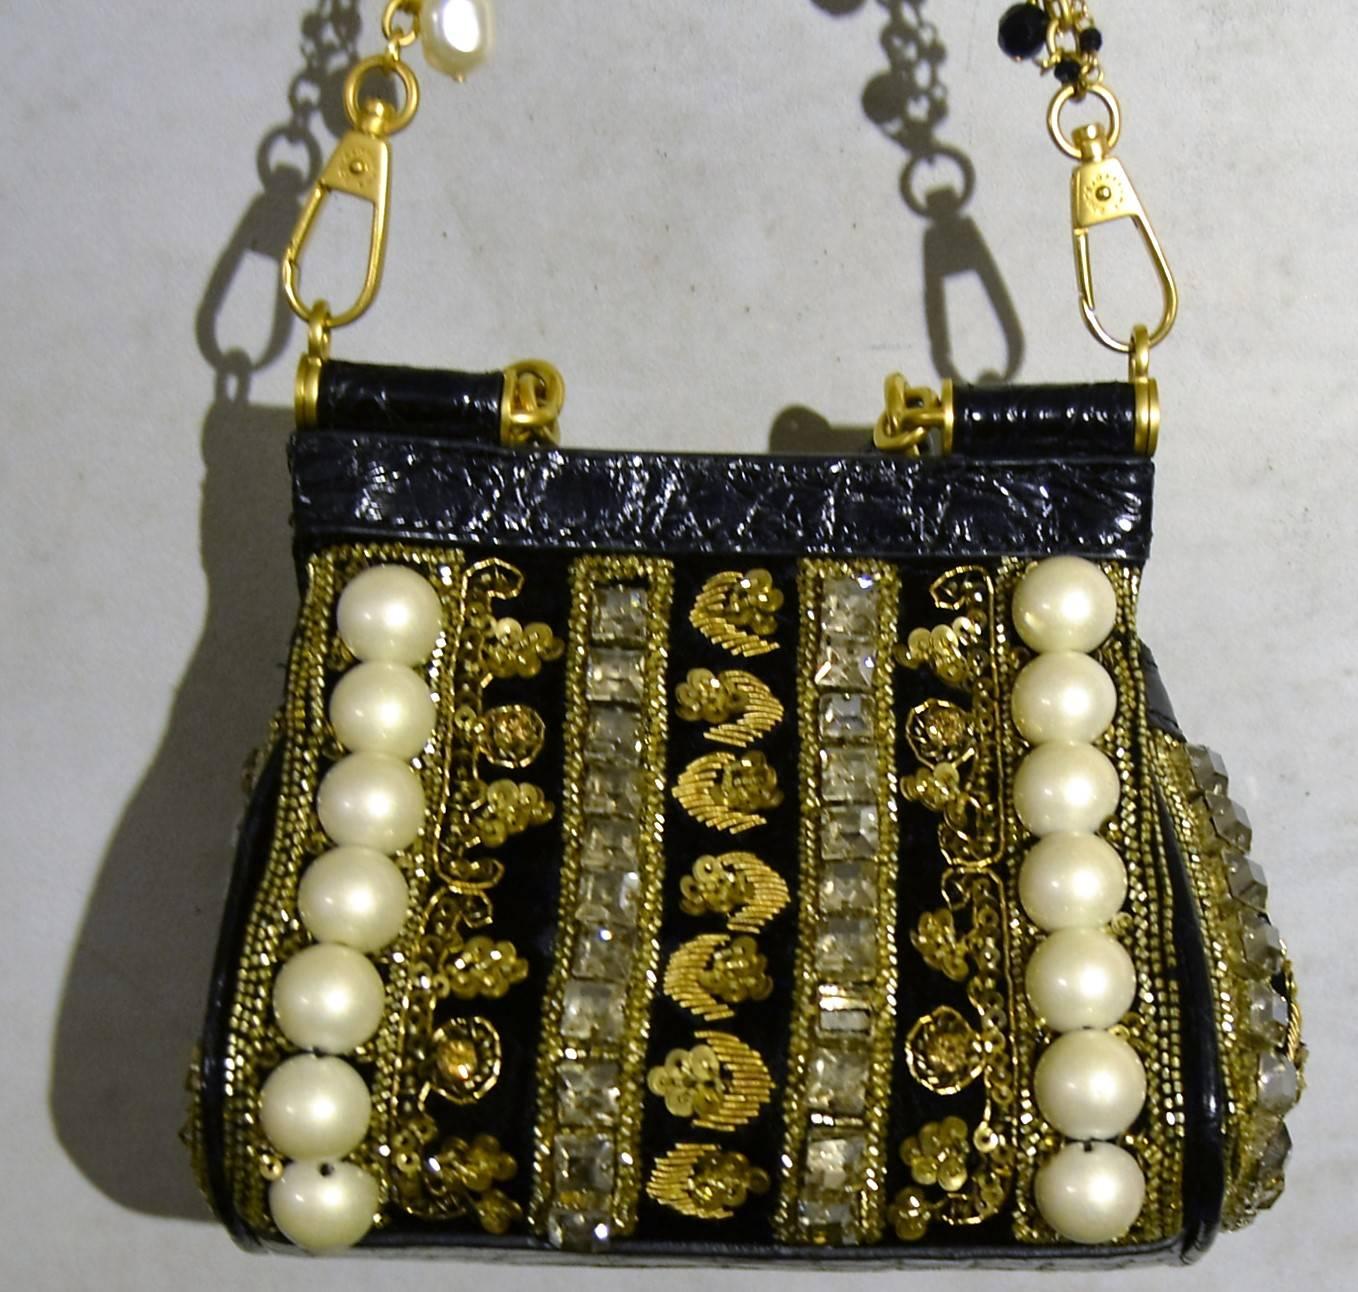 2014 Dolce & Gabbana Small Sicily bag with pearls 1